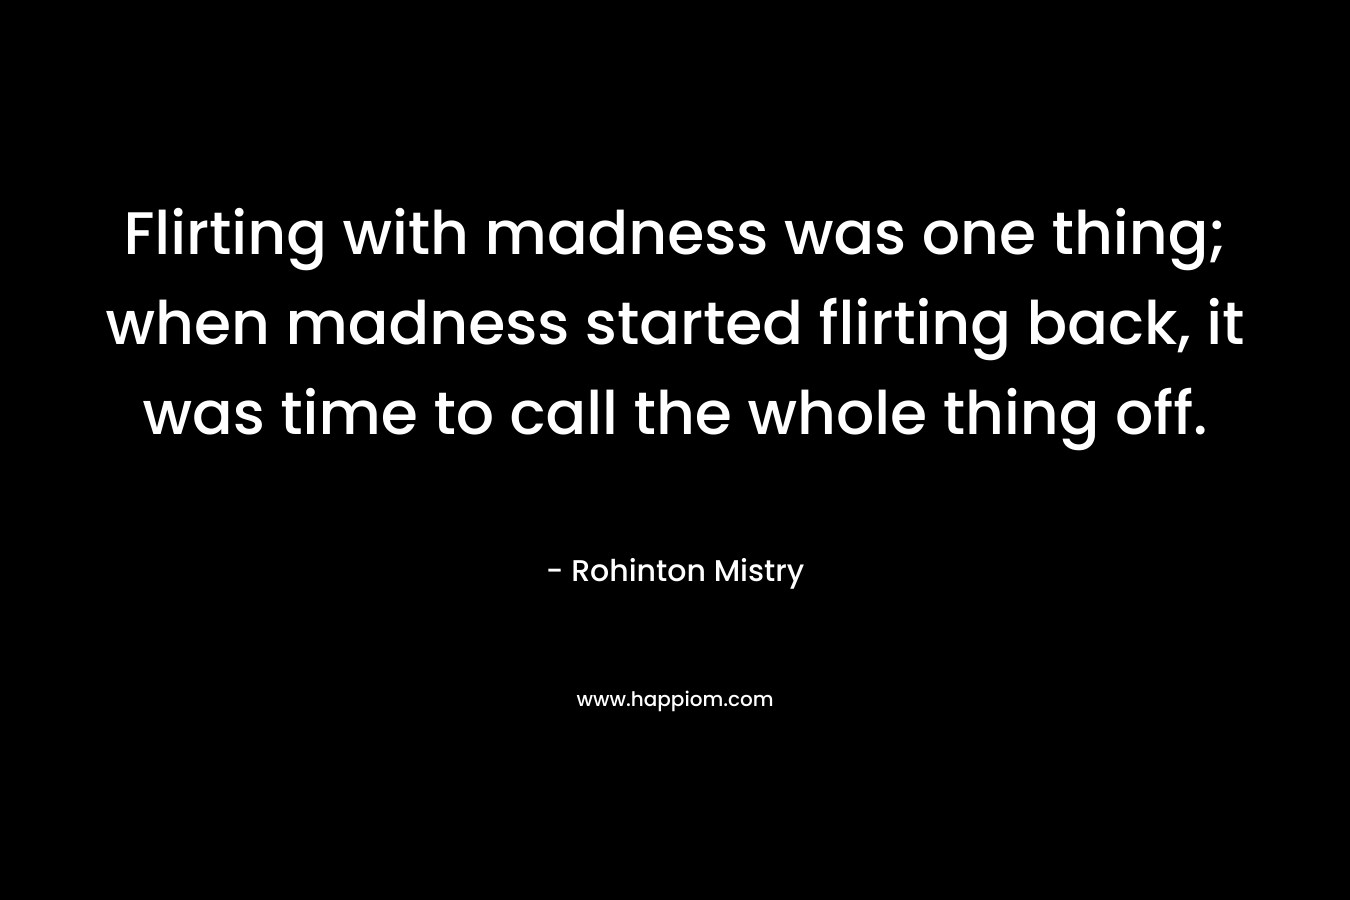 Flirting with madness was one thing; when madness started flirting back, it was time to call the whole thing off.